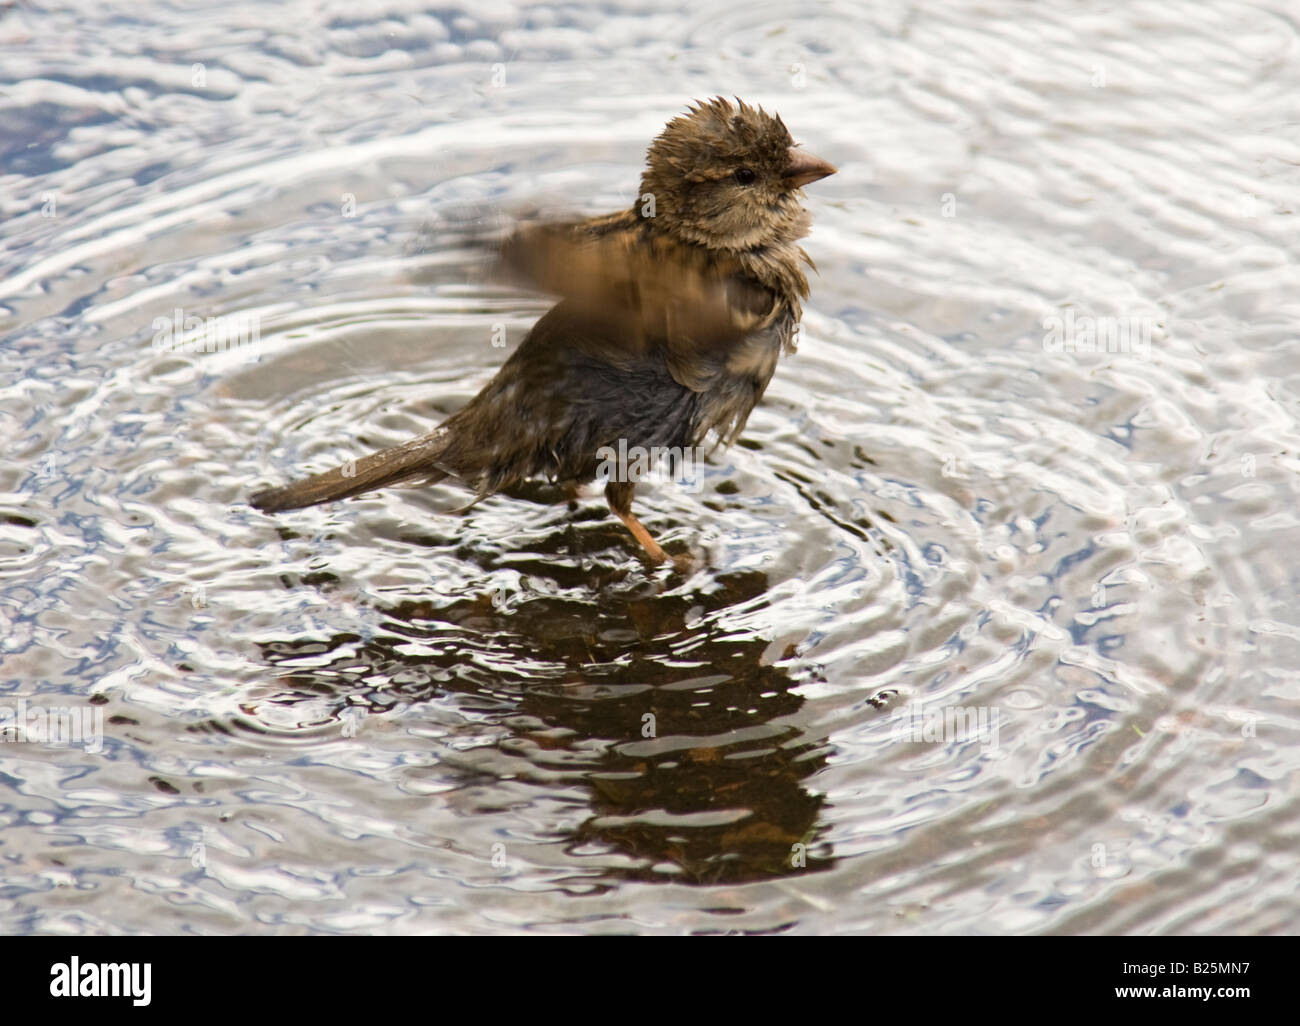 Sparrow cleaning feathers in puddle. Stock Photo